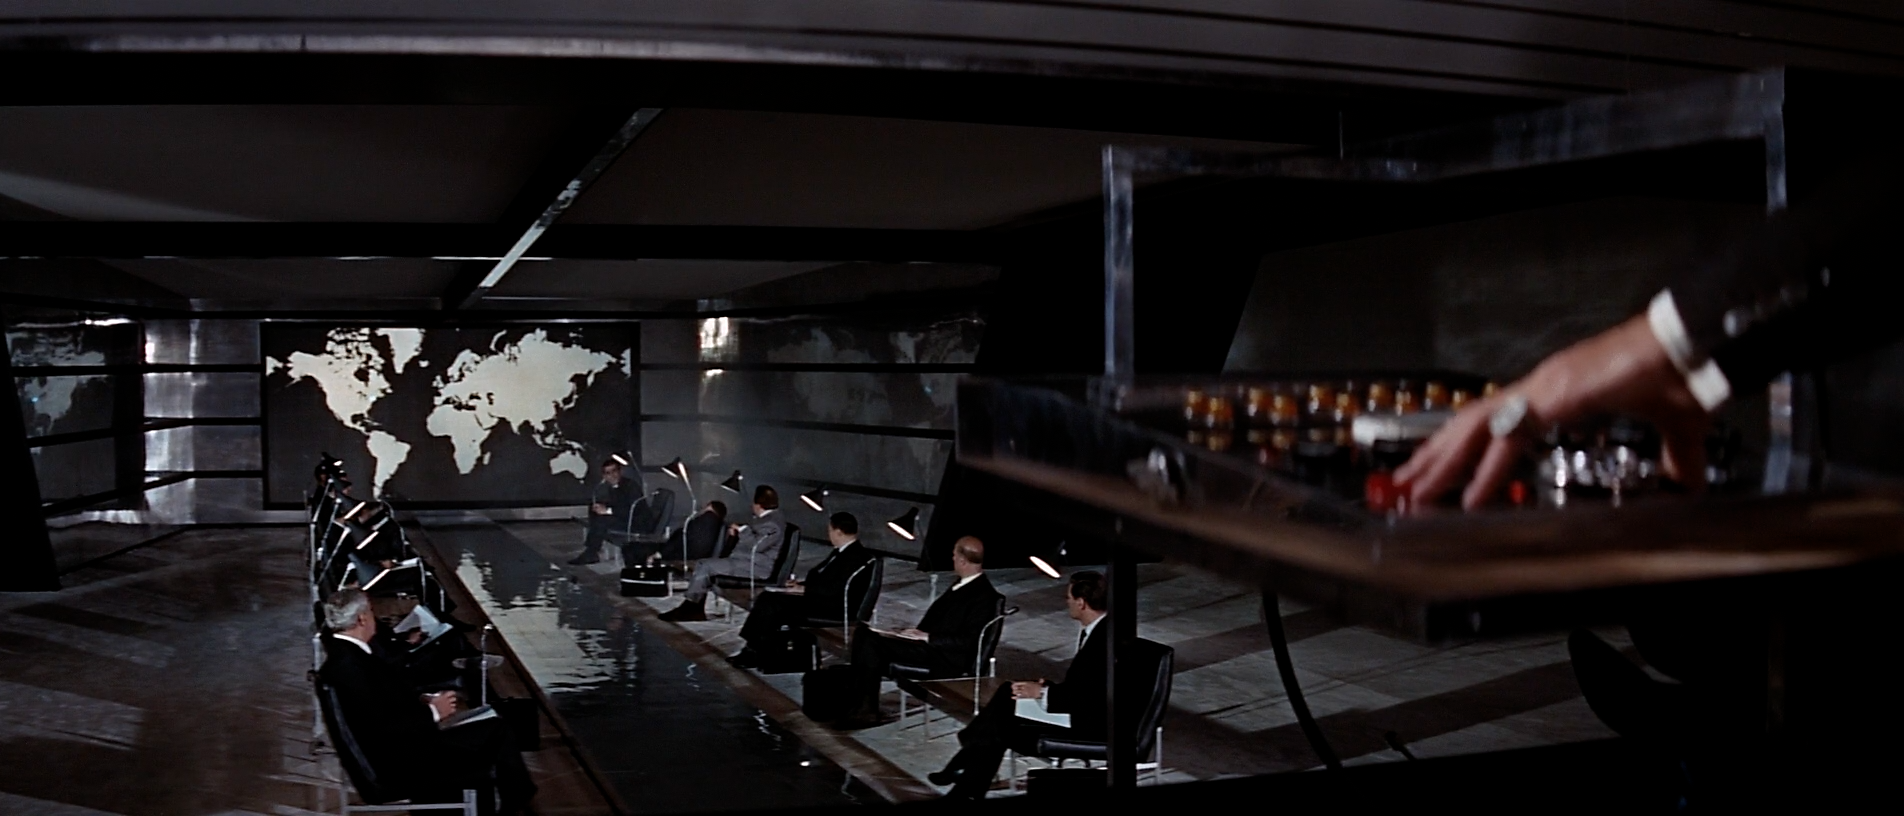 https://vignette.wikia.nocookie.net/jamesbond/images/2/29/Thunderball_-_SPECTRE_lair_9.png/revision/latest?cb=20150407050354